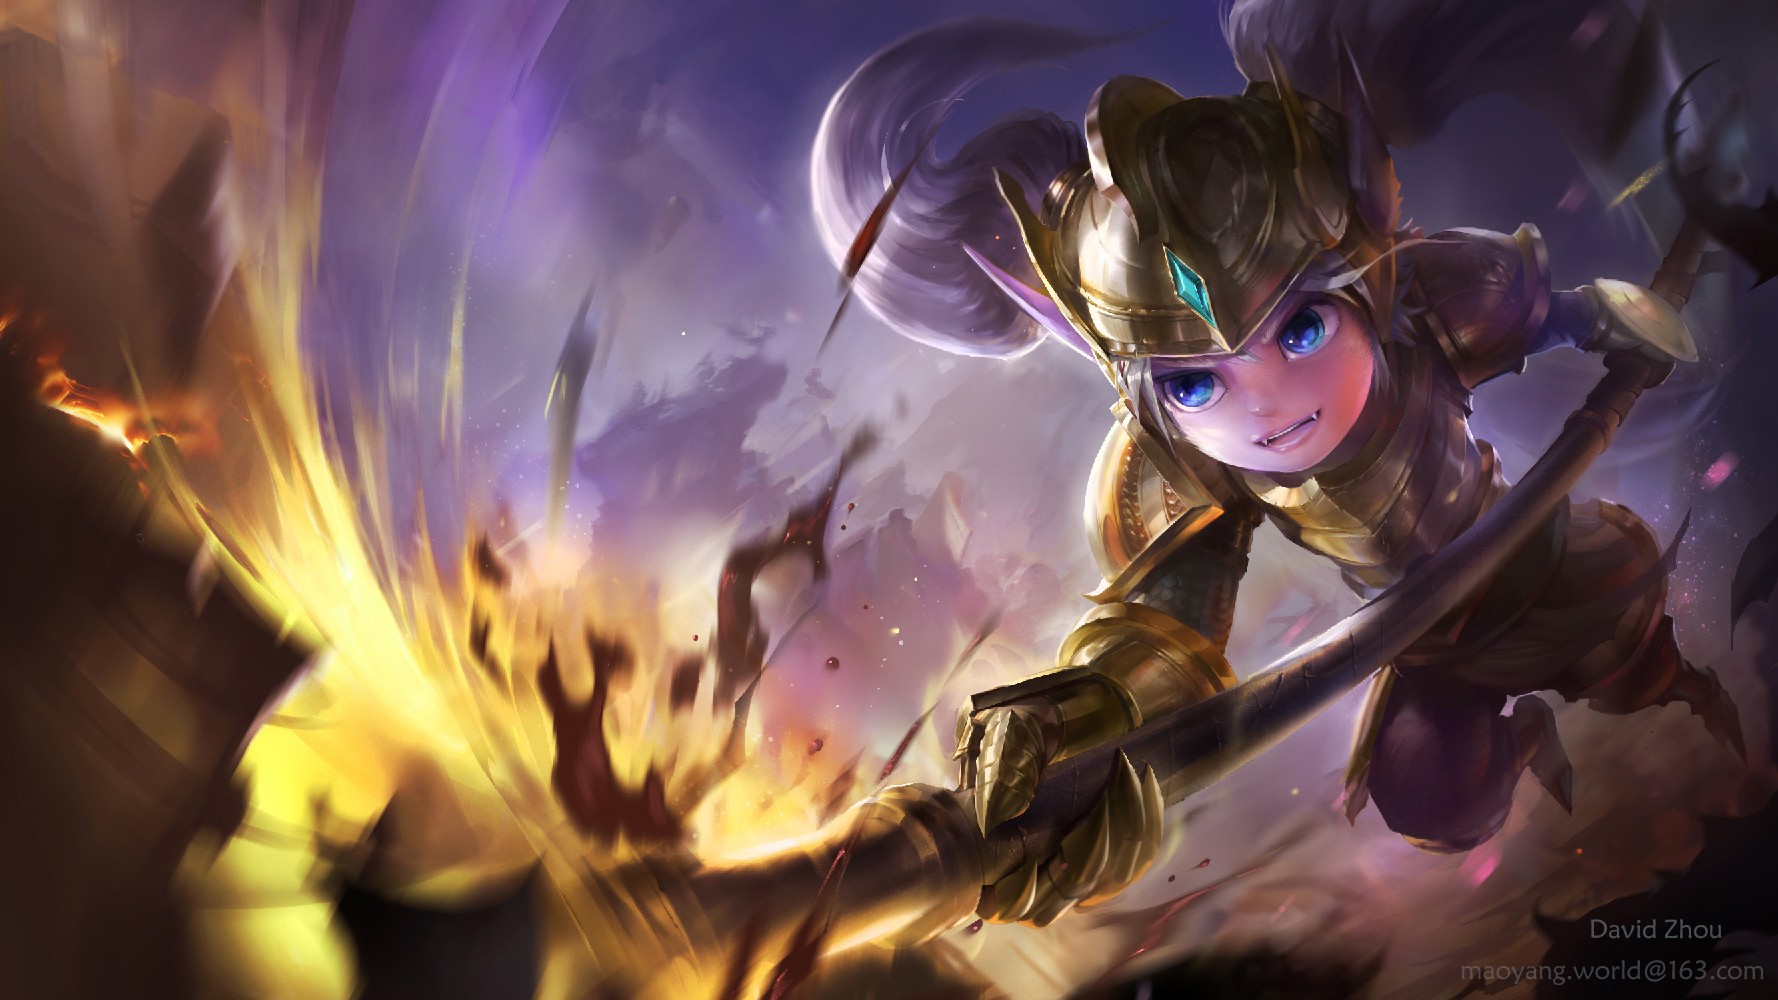 General 1778x1000 fan art League of Legends Poppy (League of Legends) video games PC gaming watermarked blue eyes video game girls